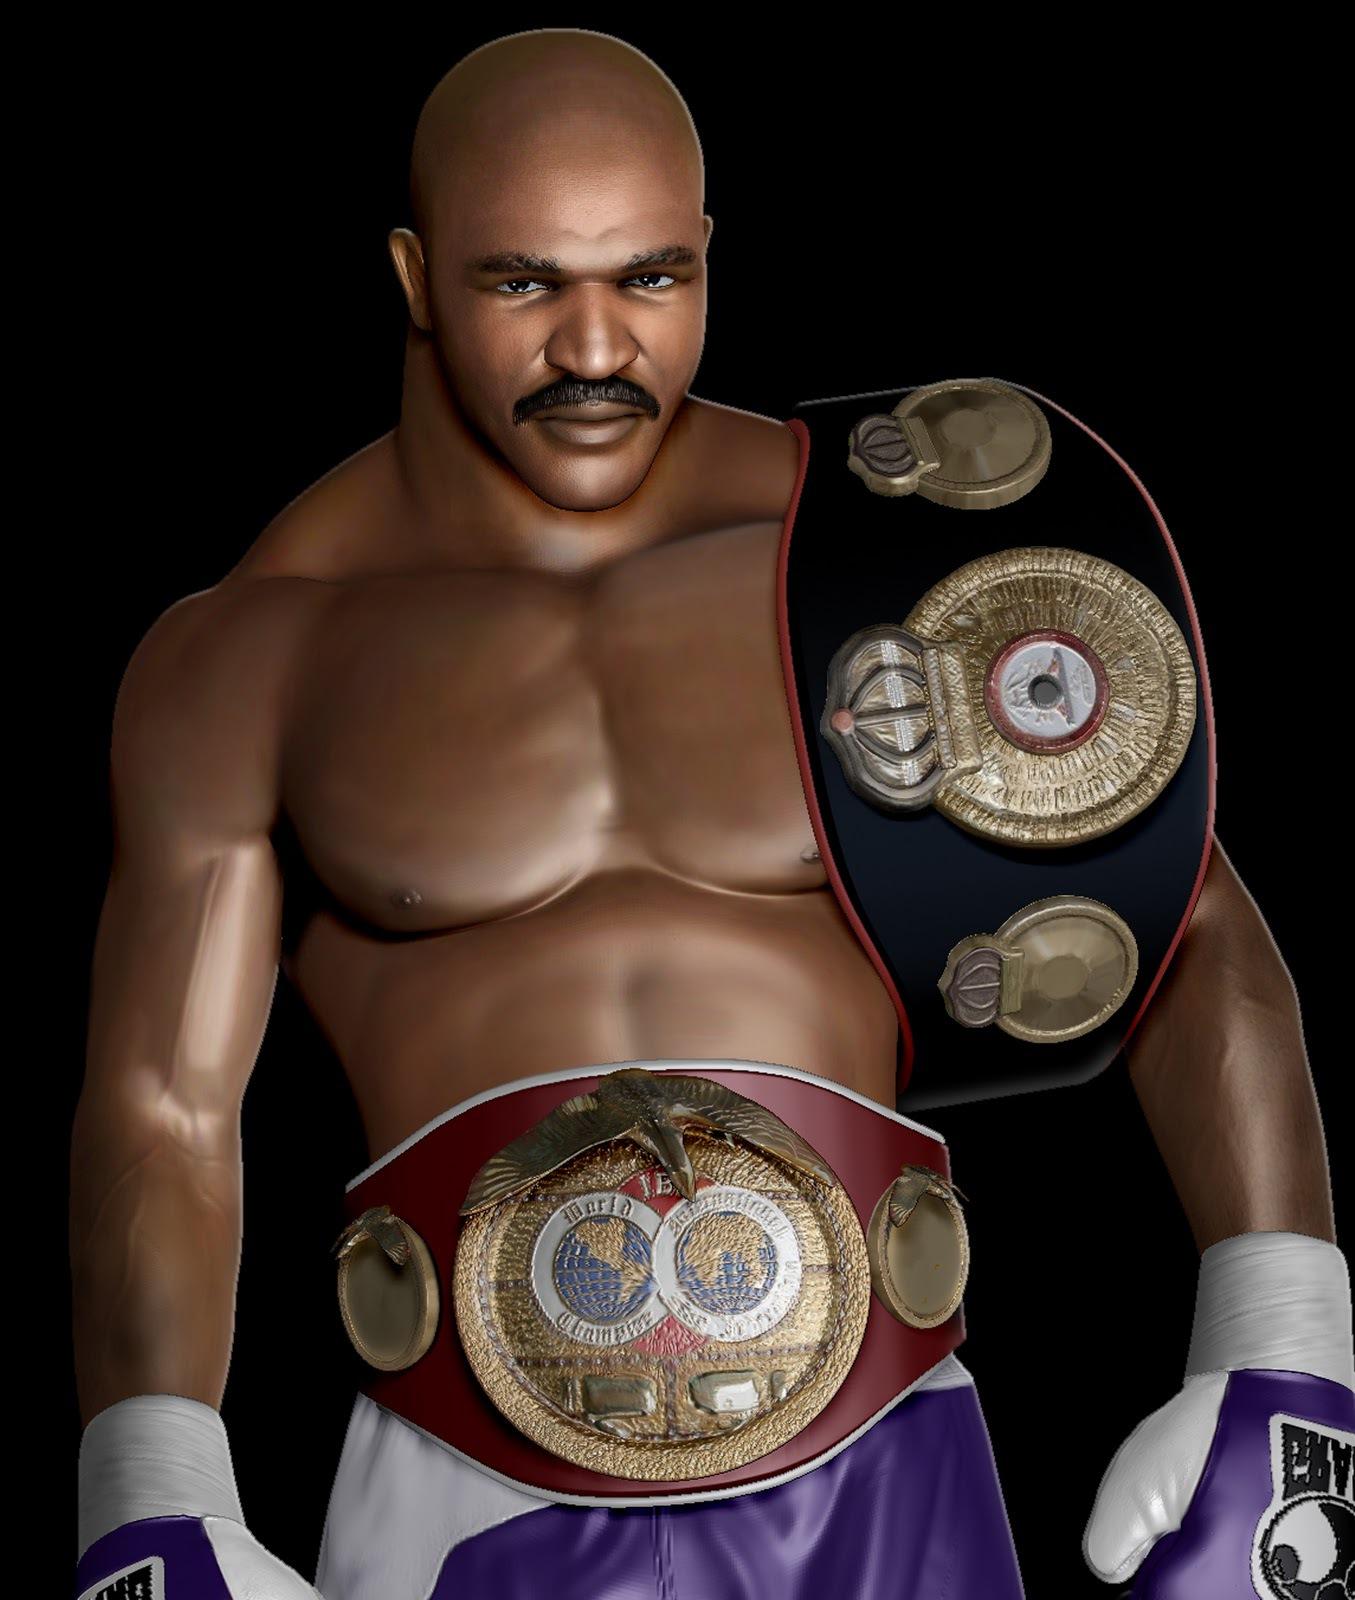 Boxer Evander Holyfield 3D wallpaper and image